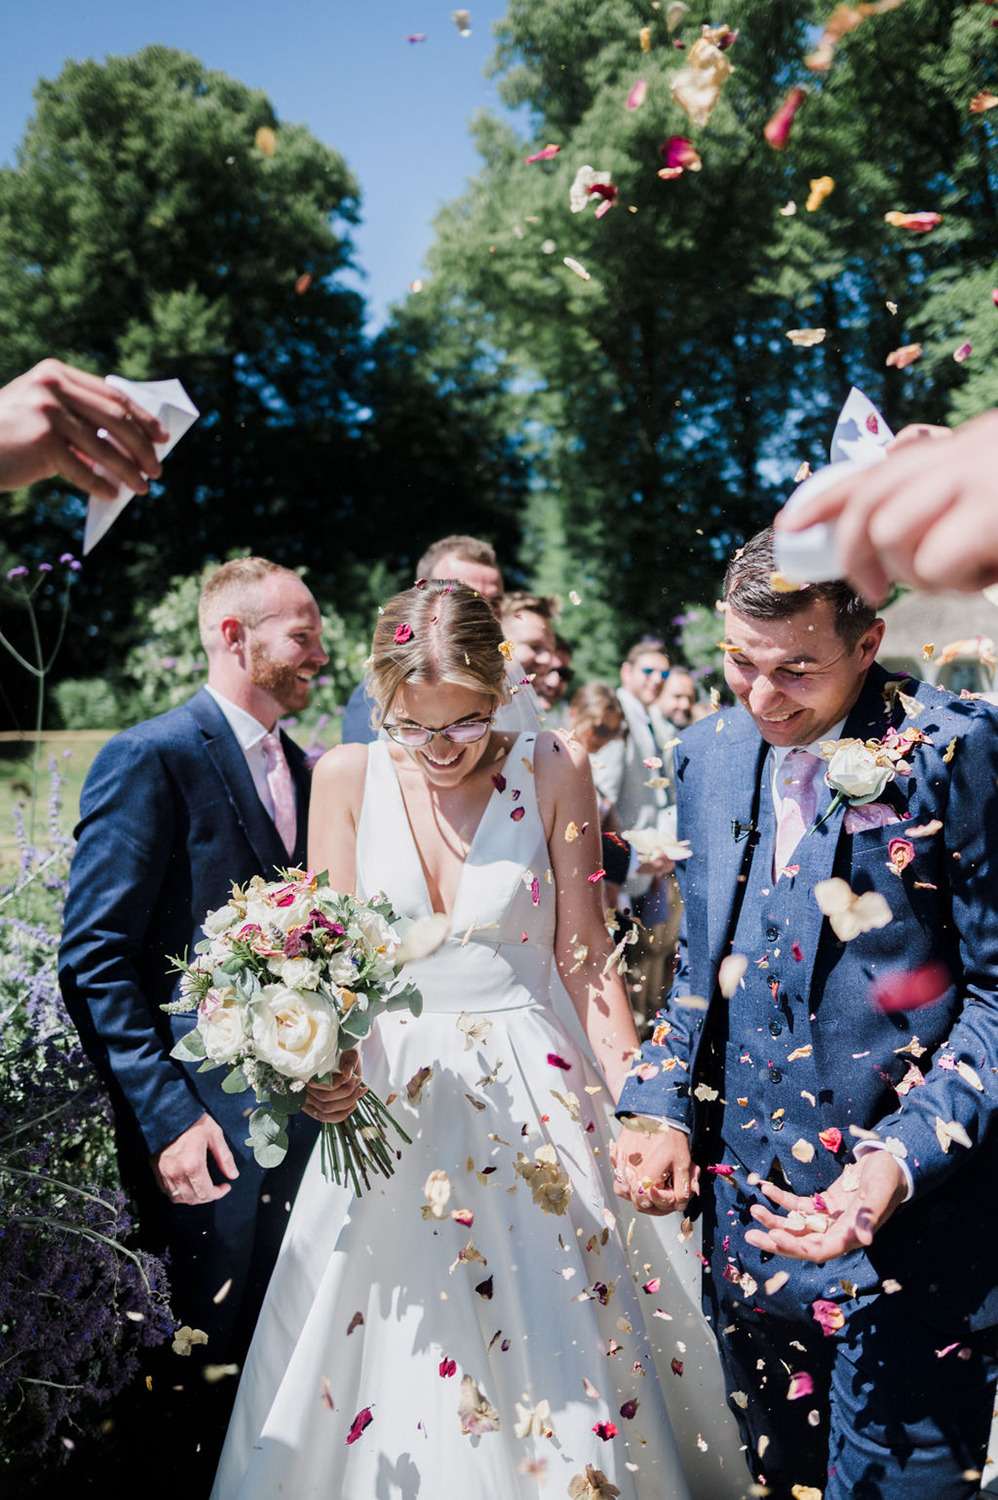 Liberty Pearl Photo & Film Collective Devon Wedding Photography at Deer Park Country House. Bride and groom showered in confetti. 